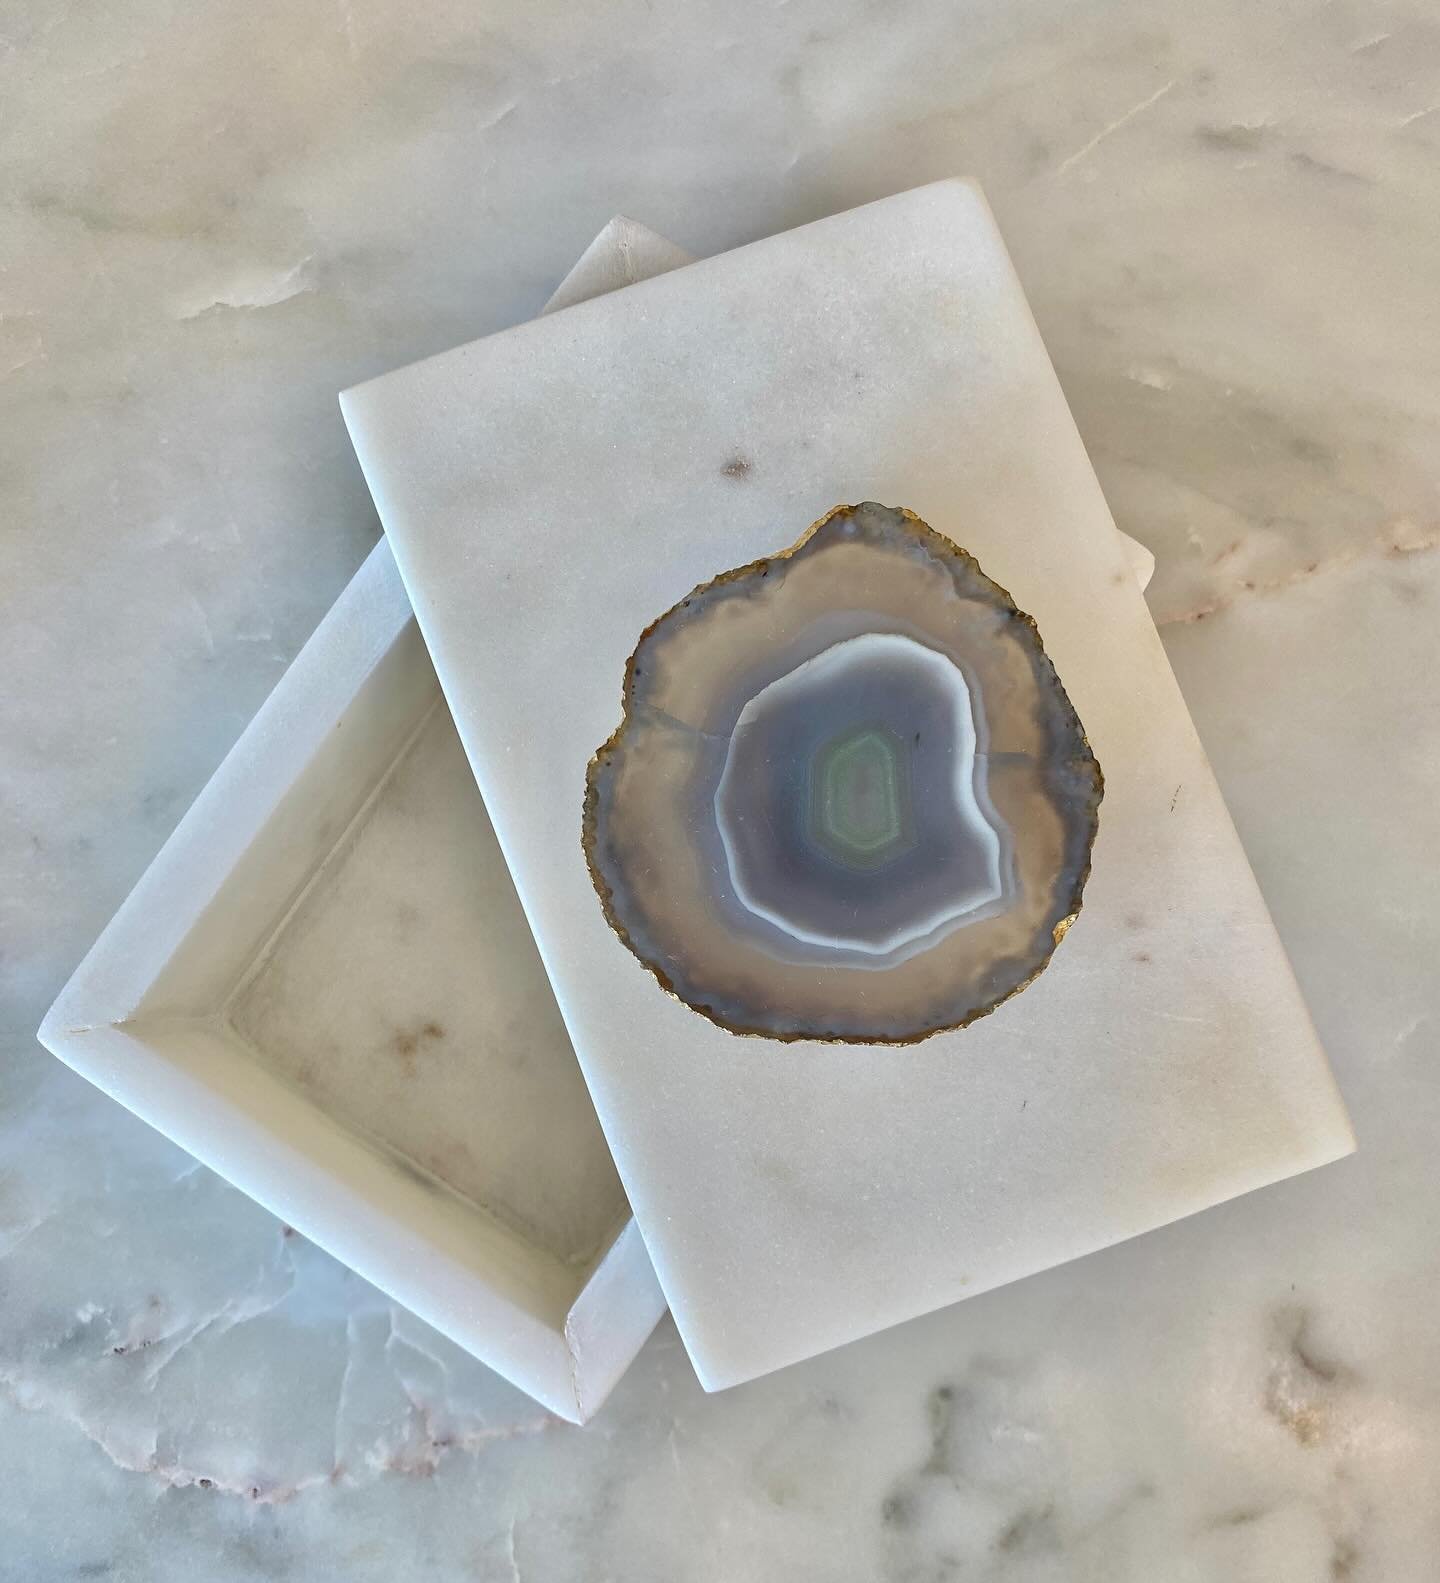 Looking for a special Mother&rsquo;s Day gift 🎁 &hellip; this marble and agate box can hold all her pretties! 
&bull;
&bull;
&bull;
&bull;
&bull;
 #islandlife #soulhouse #soulhousekeywest
#shoplocal #retailkeywest #retail  #creative #homegoods #appa